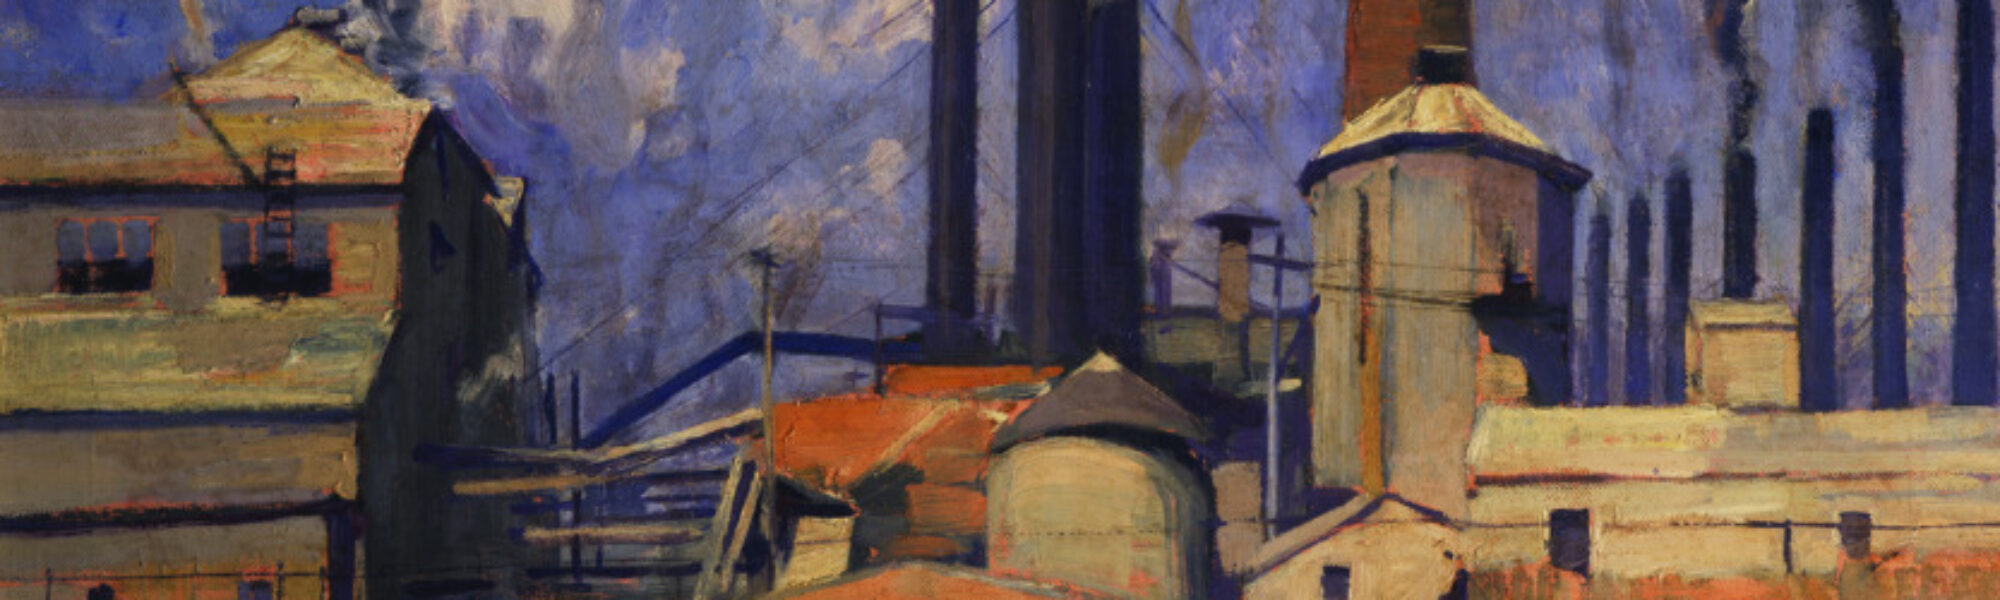 Oil painting of an industrial waterside scene showing smoking pot stacks